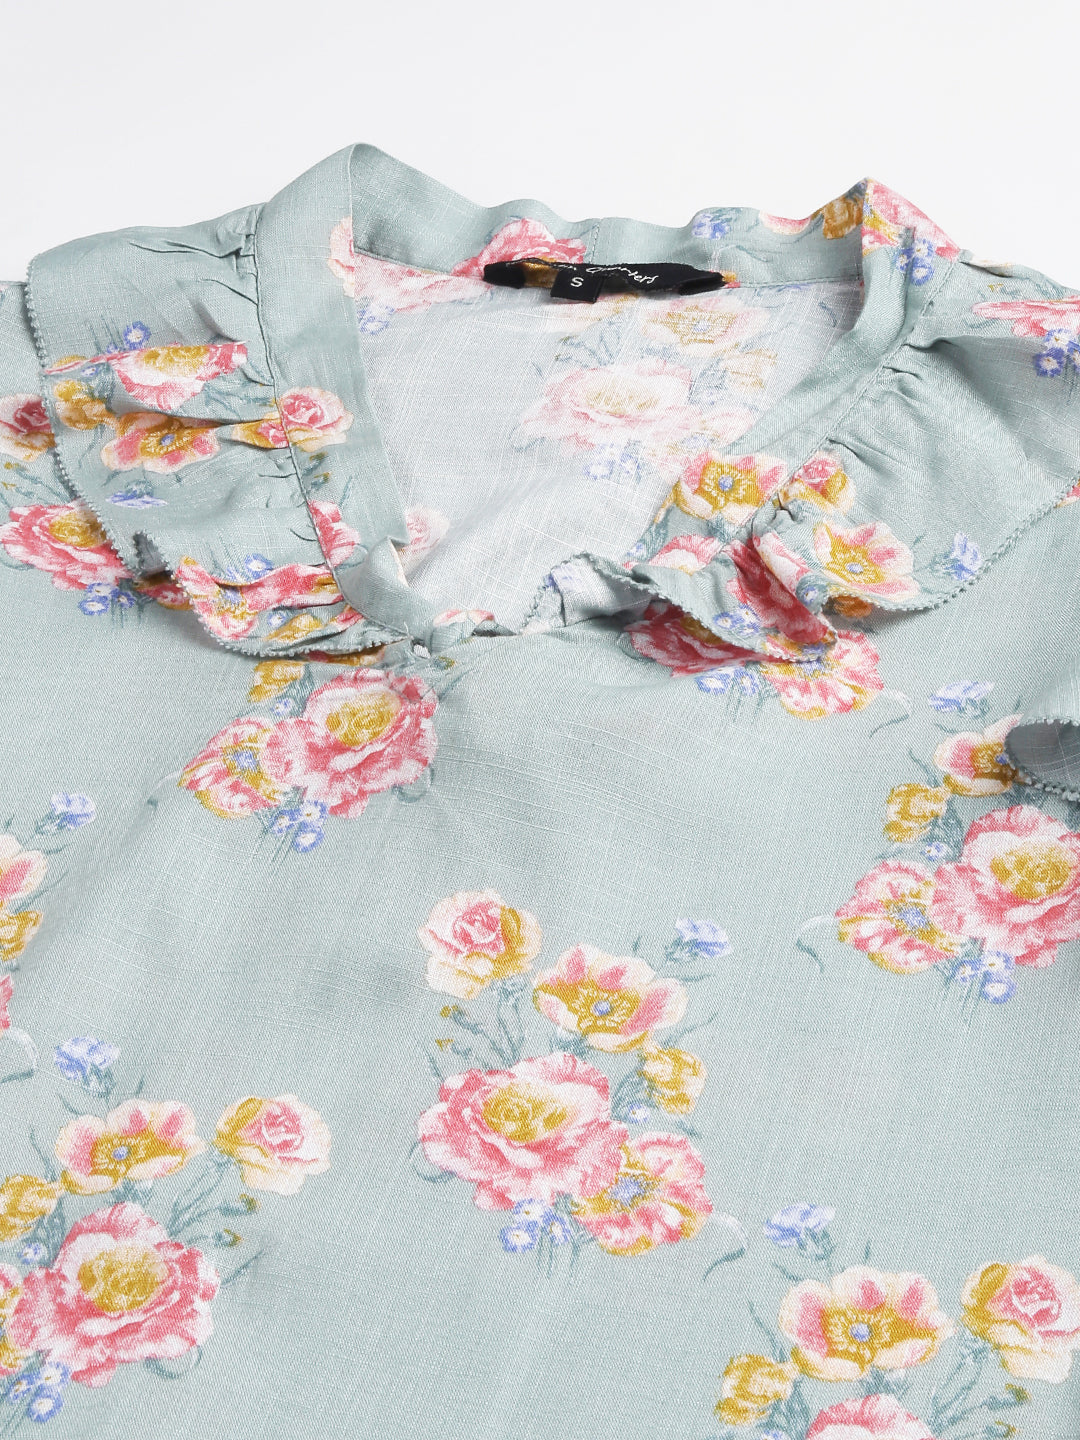 Blue Floral Printed Cap Sleeve With Tie Up Neck Top